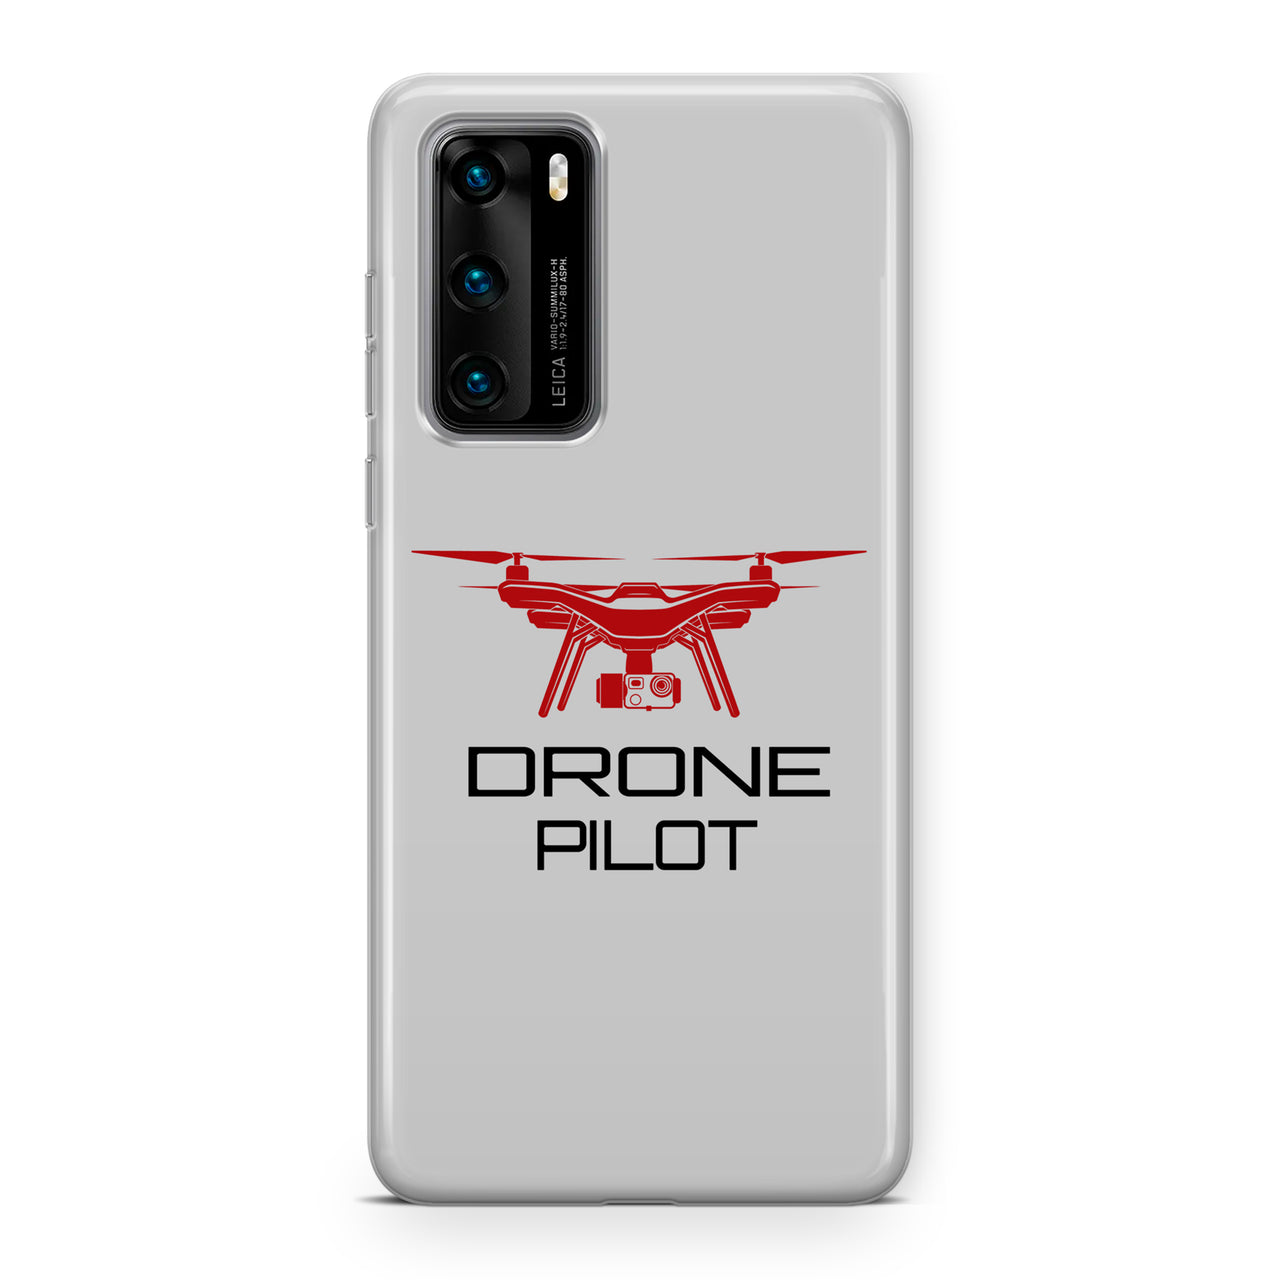 Drone Pilot Designed Huawei Cases